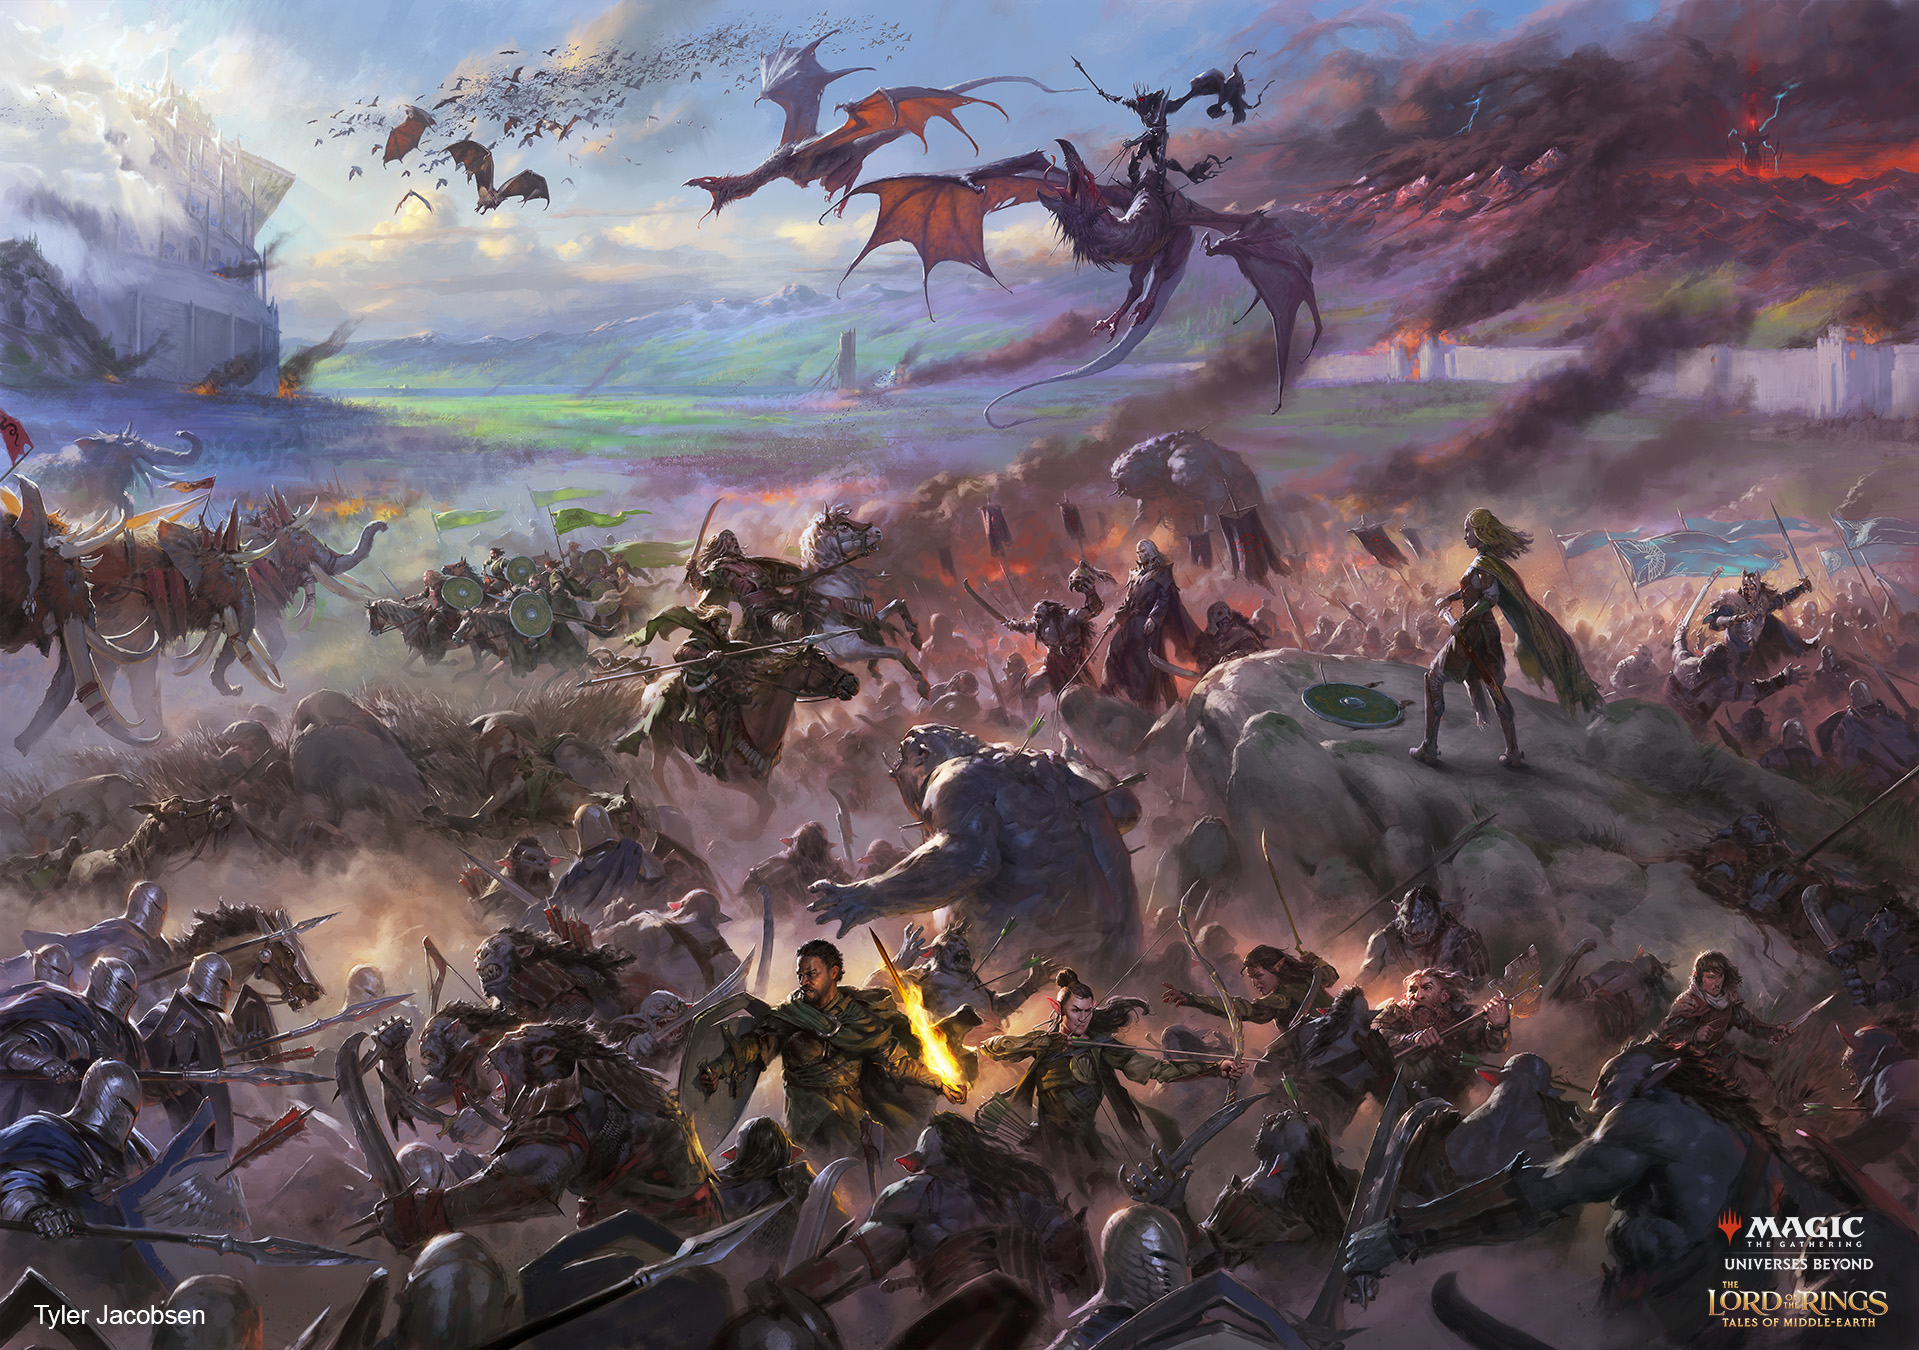 A card art image from Magic: The Gathering's Lord of the Rings: Tales of Middle-earth card set.